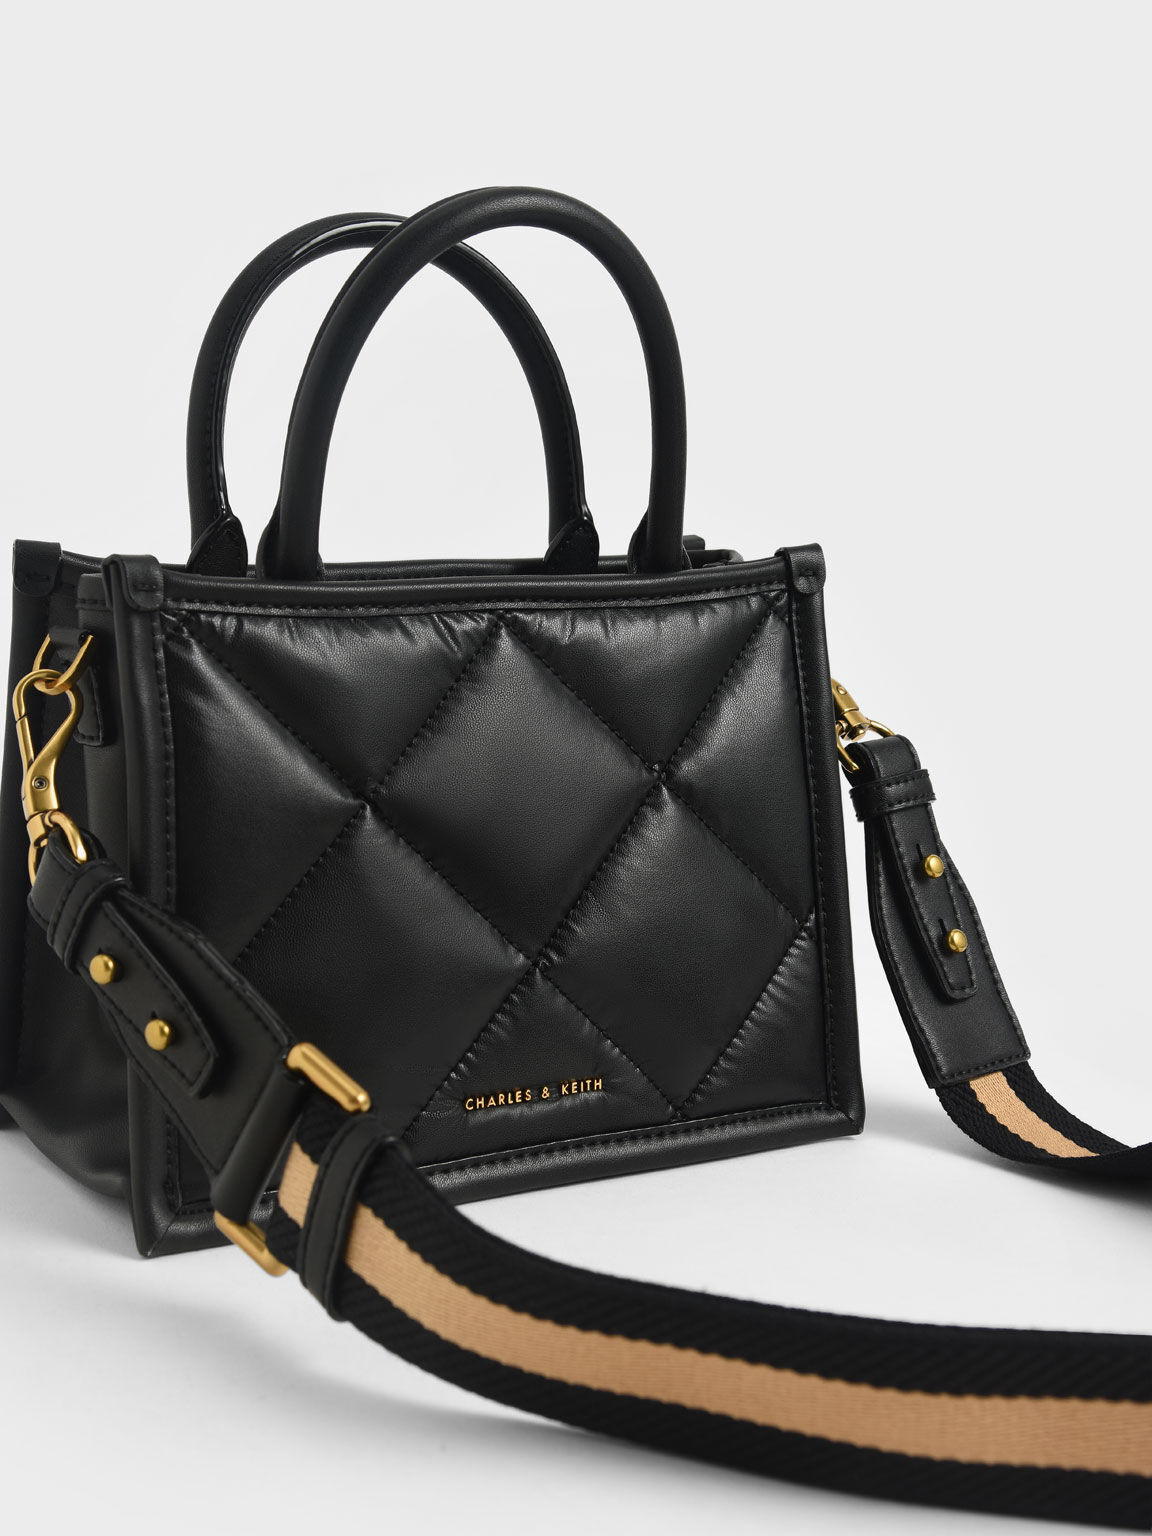 TÚI ĐEO CHÉO CHARLES KEITH QUILTED DOUBLE HANDLE TOTE BAG 14